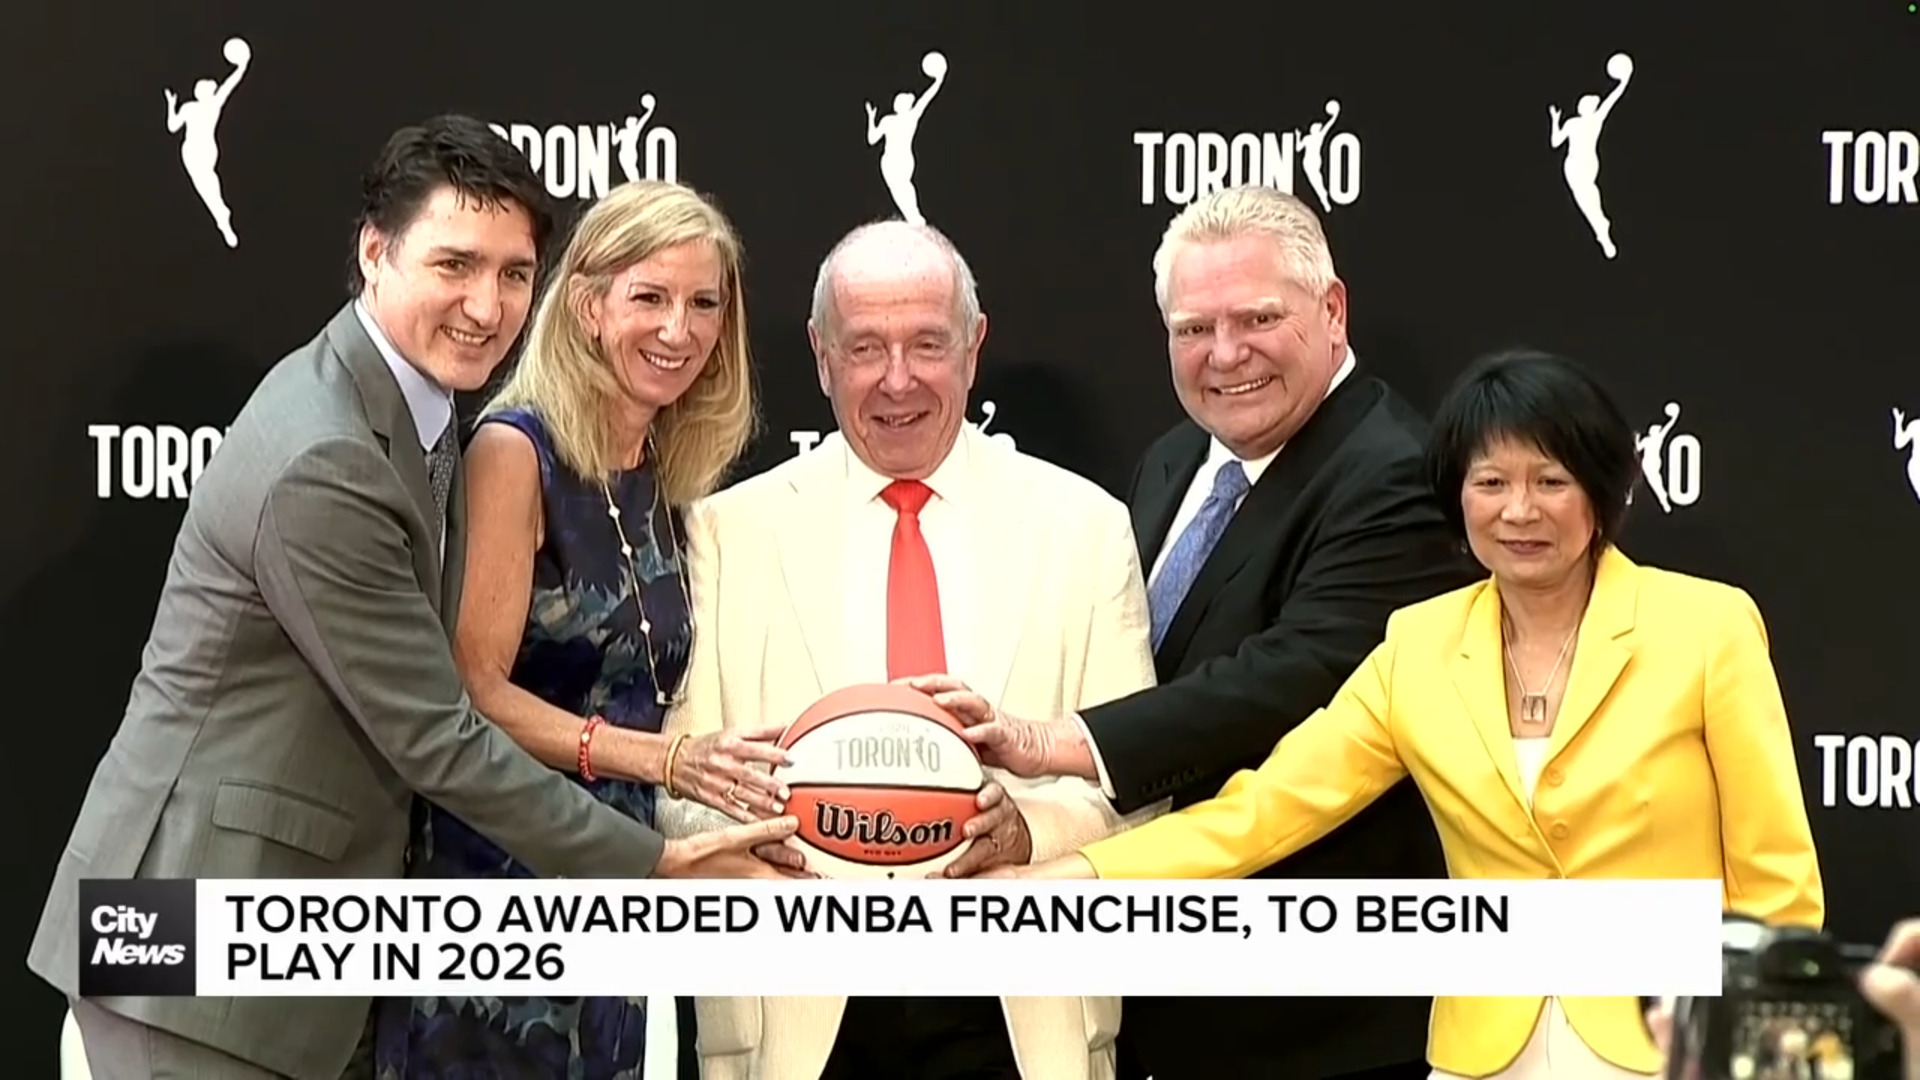 Building a new basketball legacy in Toronto